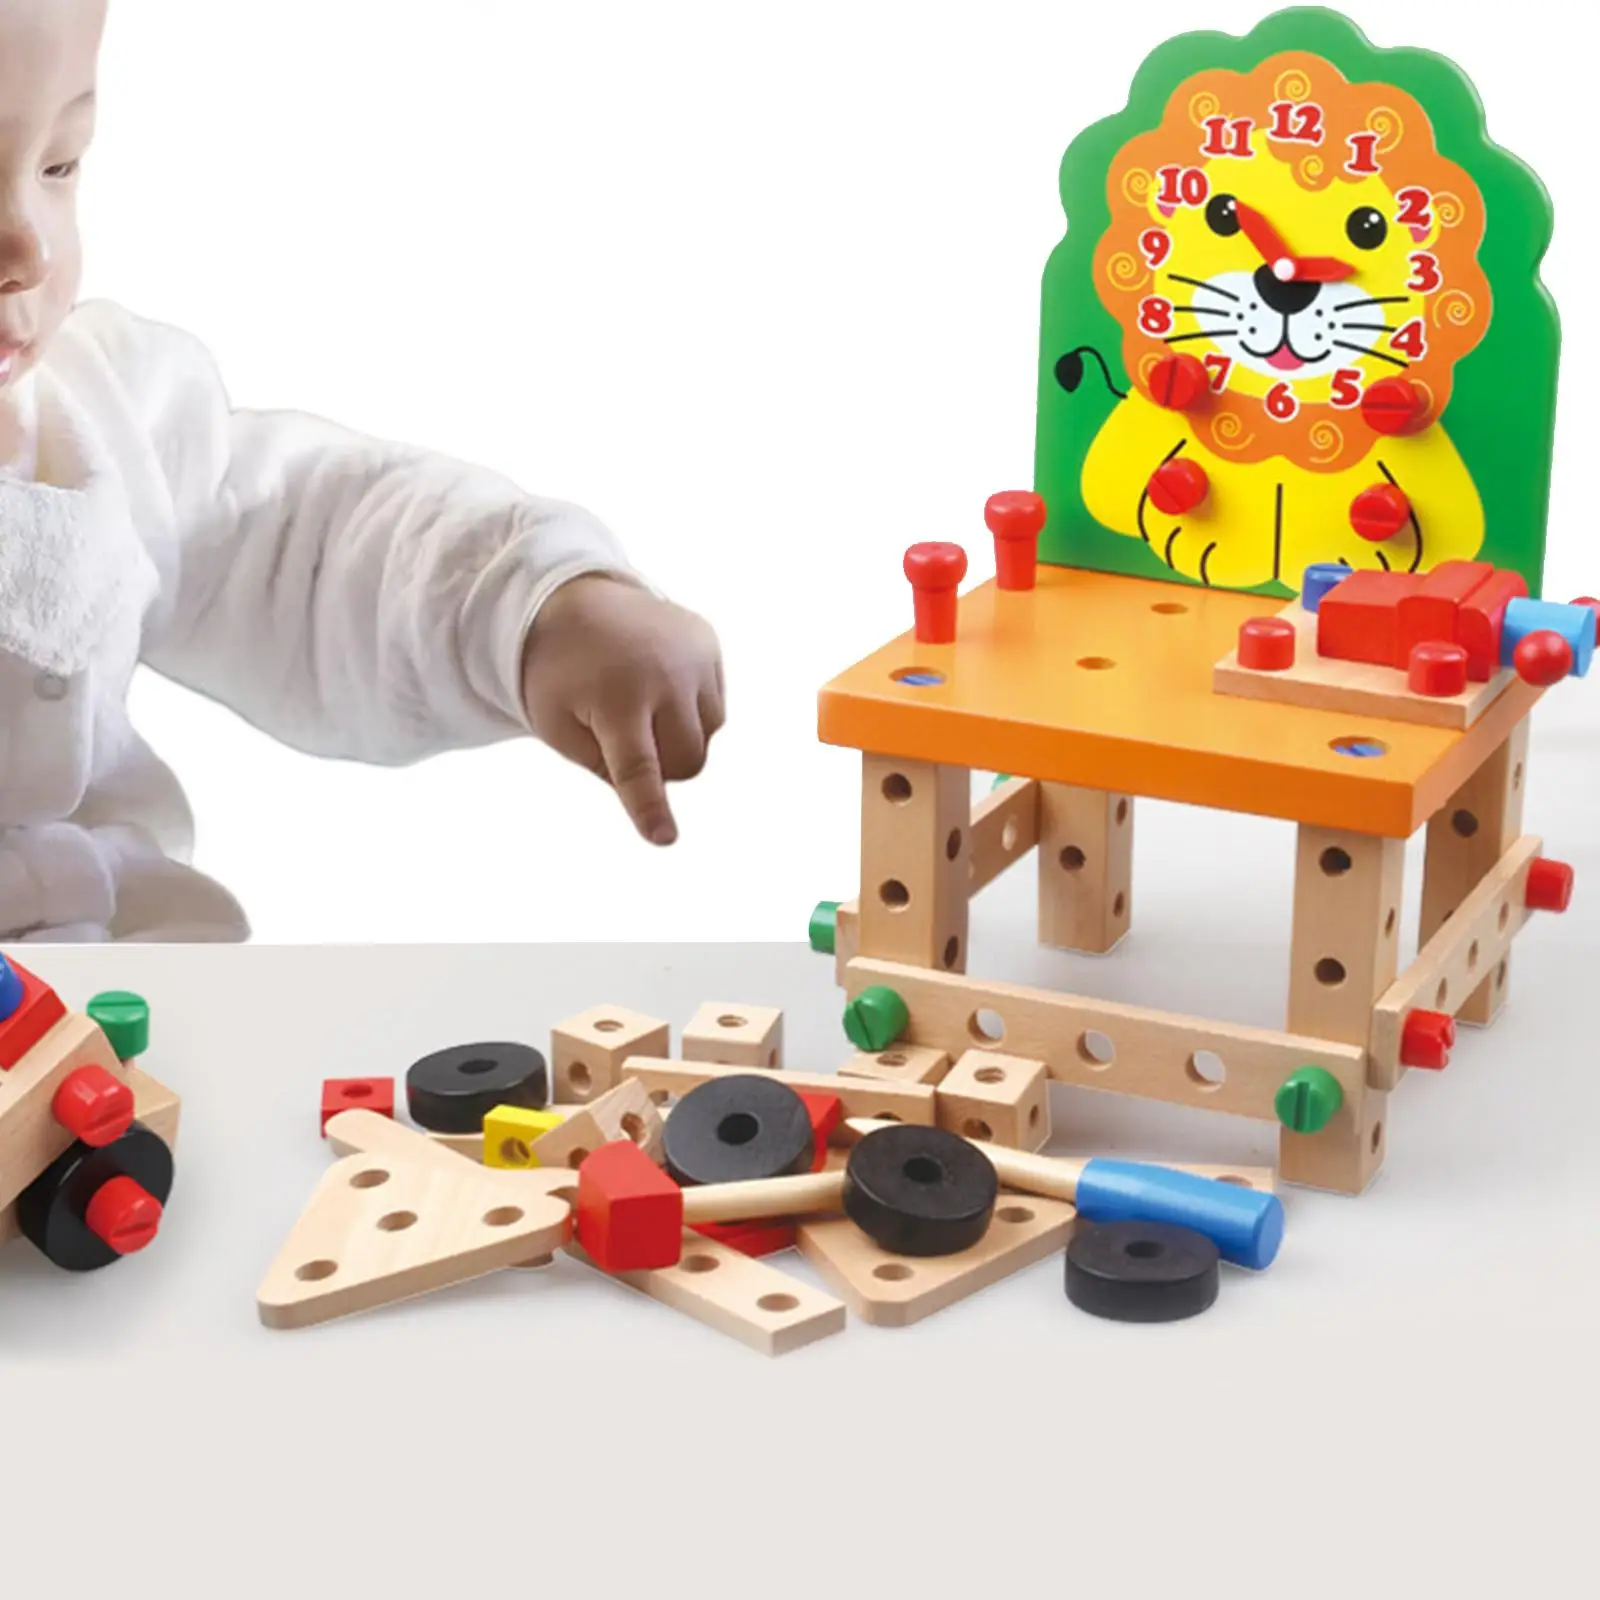 Kids Wooden Project Woodworking Kit Educational Building Toy Montessori Toys Wooden Assembling Chair for Girls Boys Gifts